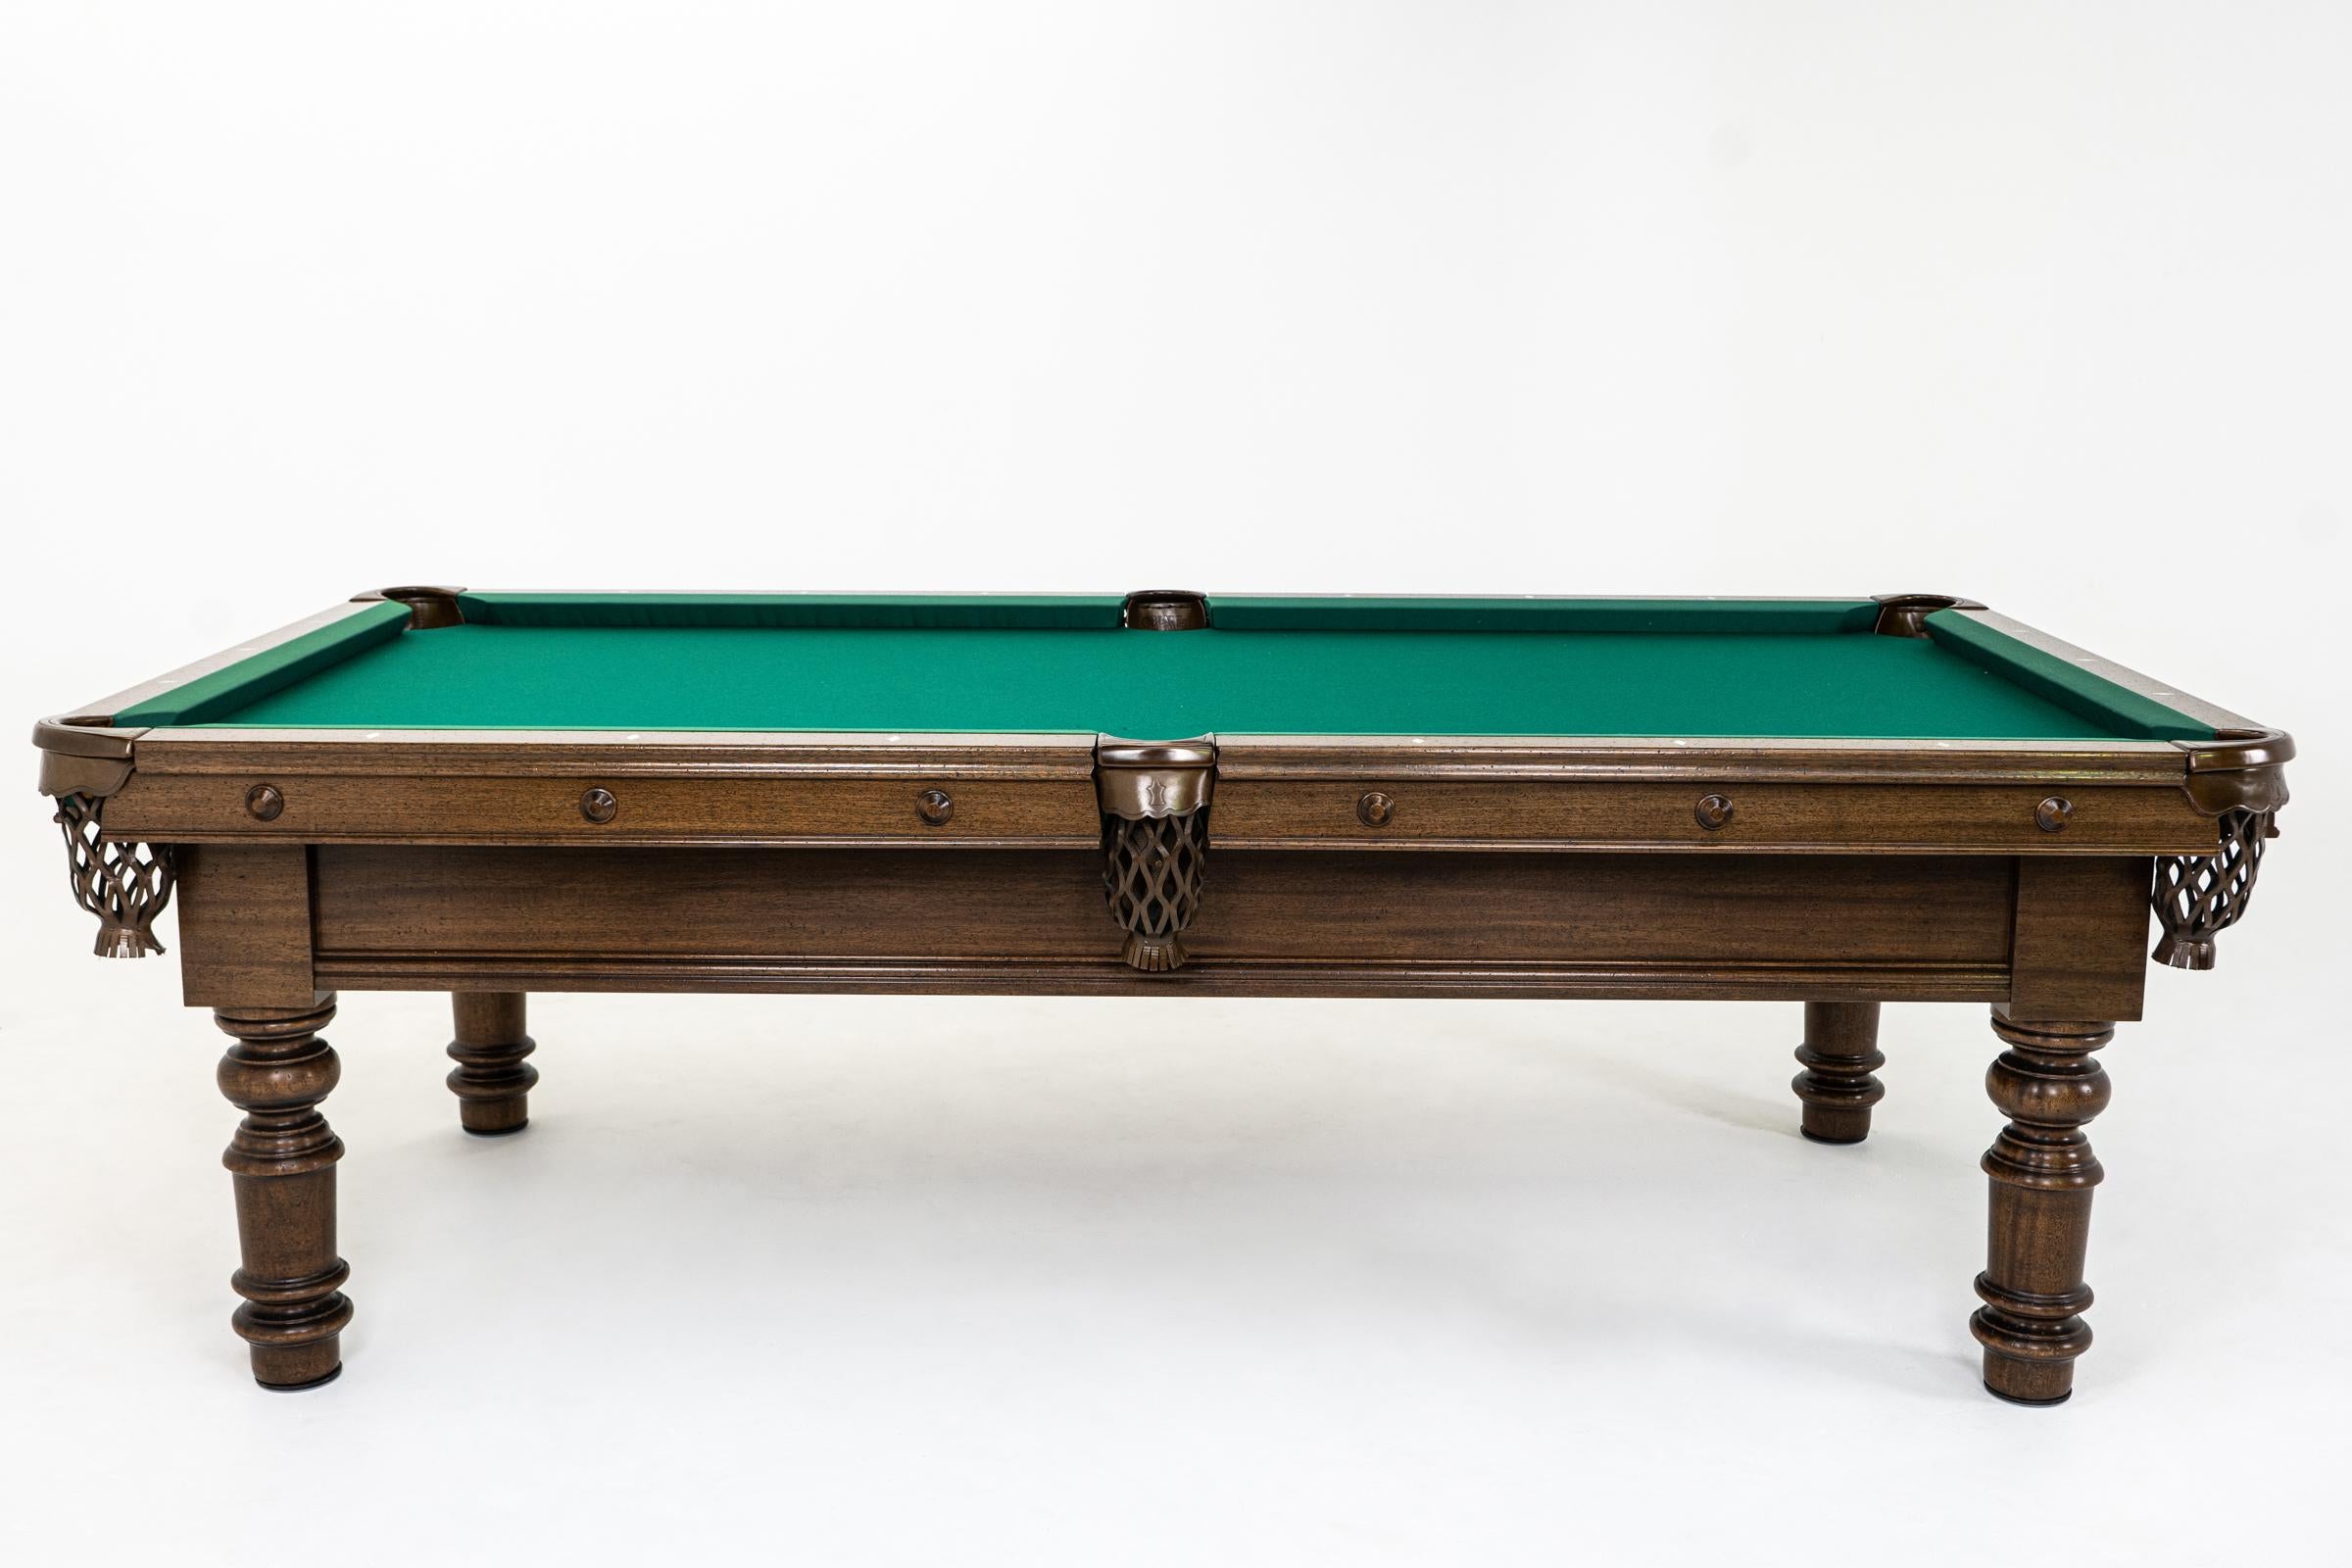 A classic billiards masterpiece. Featuring hand turned legs of solid pattern wood. Simple, yet regal designed in the United Kingdom.